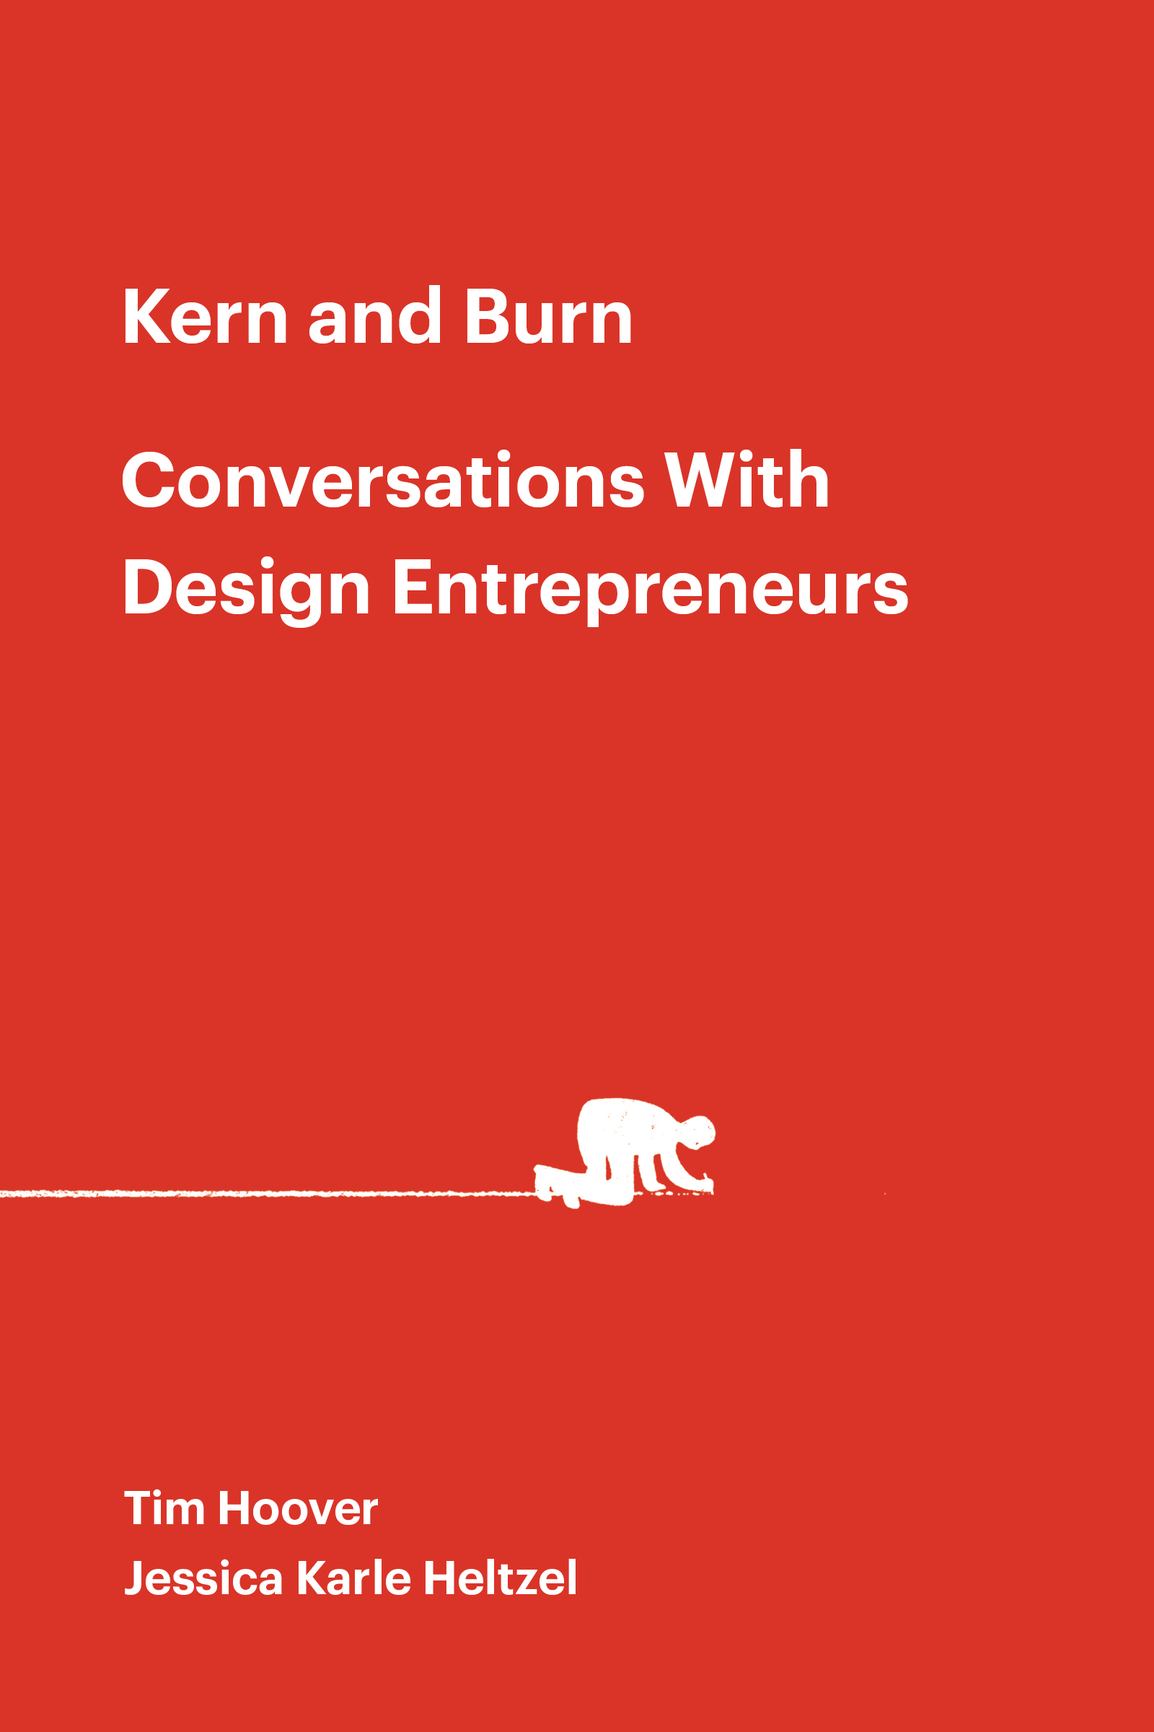 Title 1 Kern and Burn Conversations With Design Entrepreneurs Title 2 - photo 1